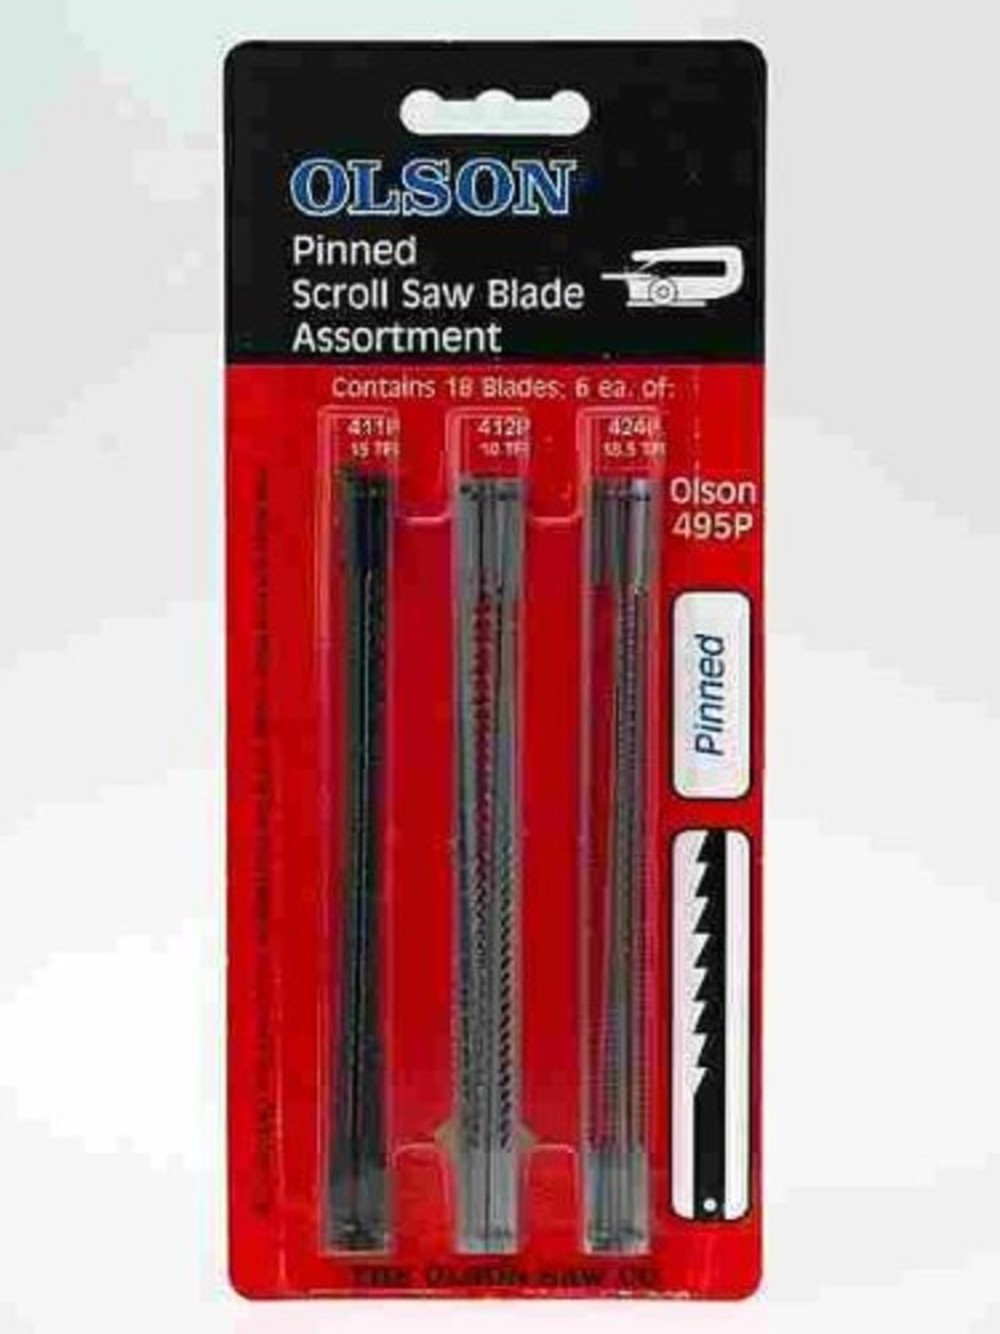 Olson Fr49501 Saw Blade Pin End Scroll Blades Part Accessories Cuts Wood Plastic for sale online